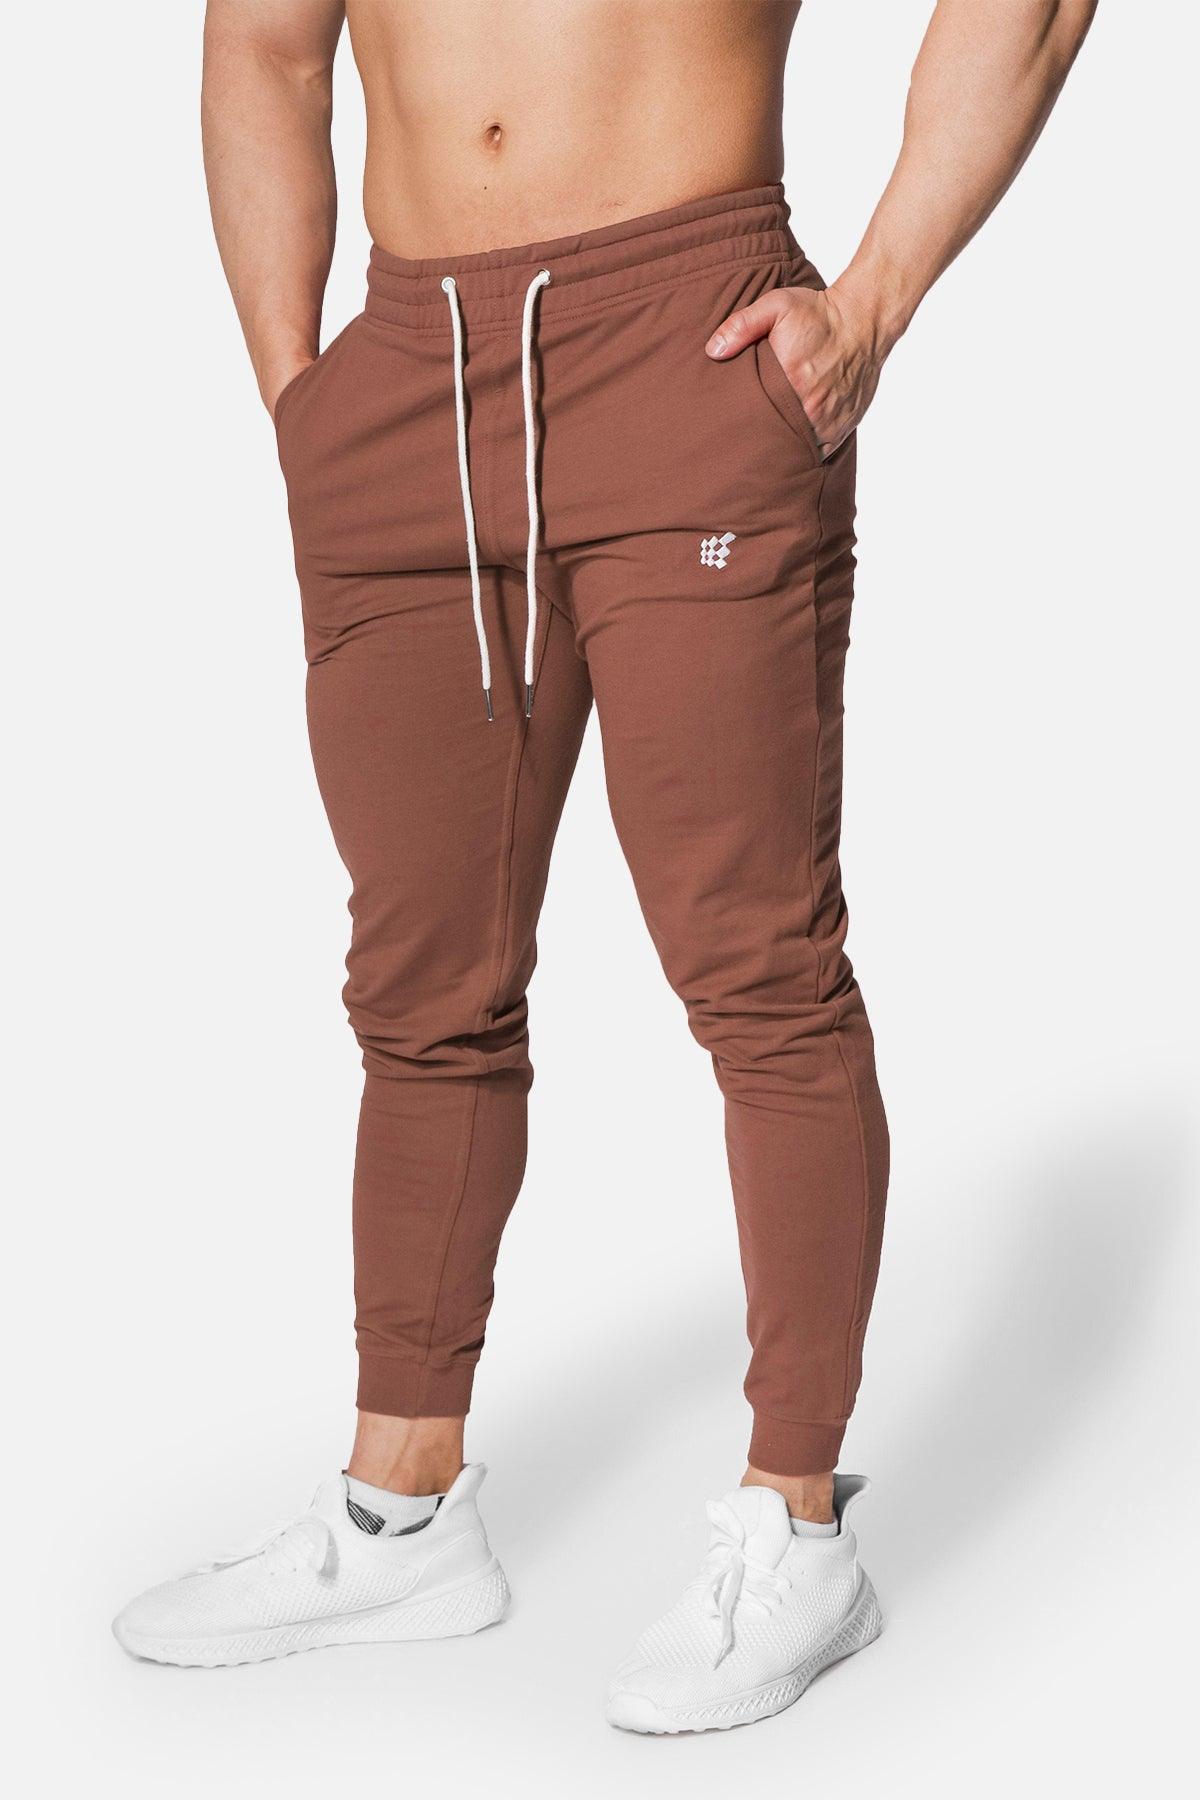 Spirit Joggers - Brown - Jed North Canada